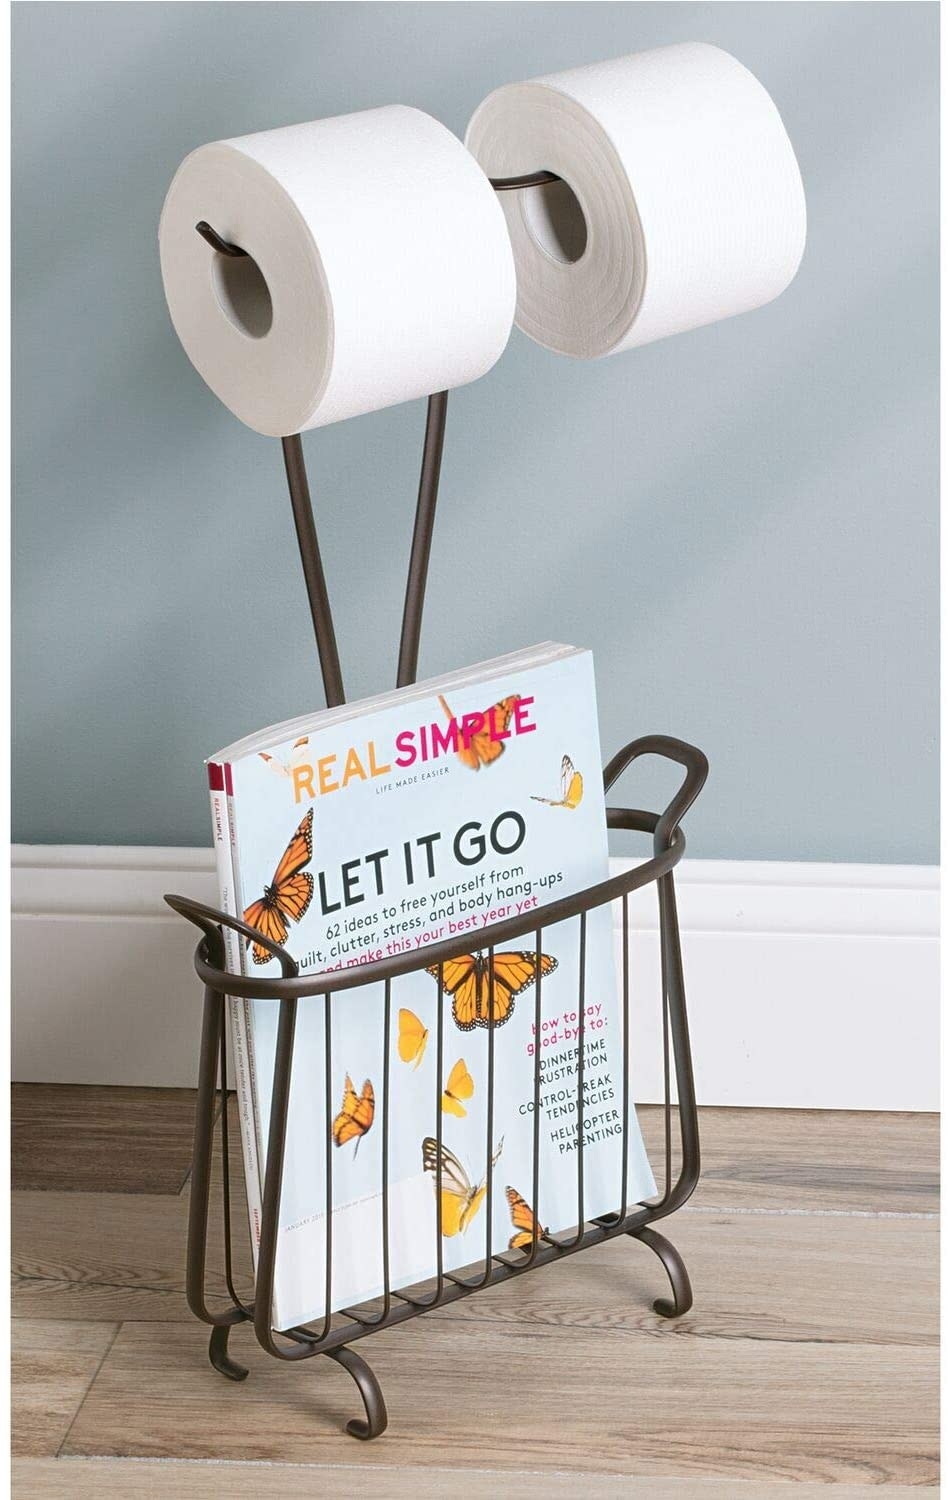 The bronze iDesign Axis Free Standing Toilet Paper Holder and Newspaper and Magazine Rack holding two rolls of toilet paper and a magazine